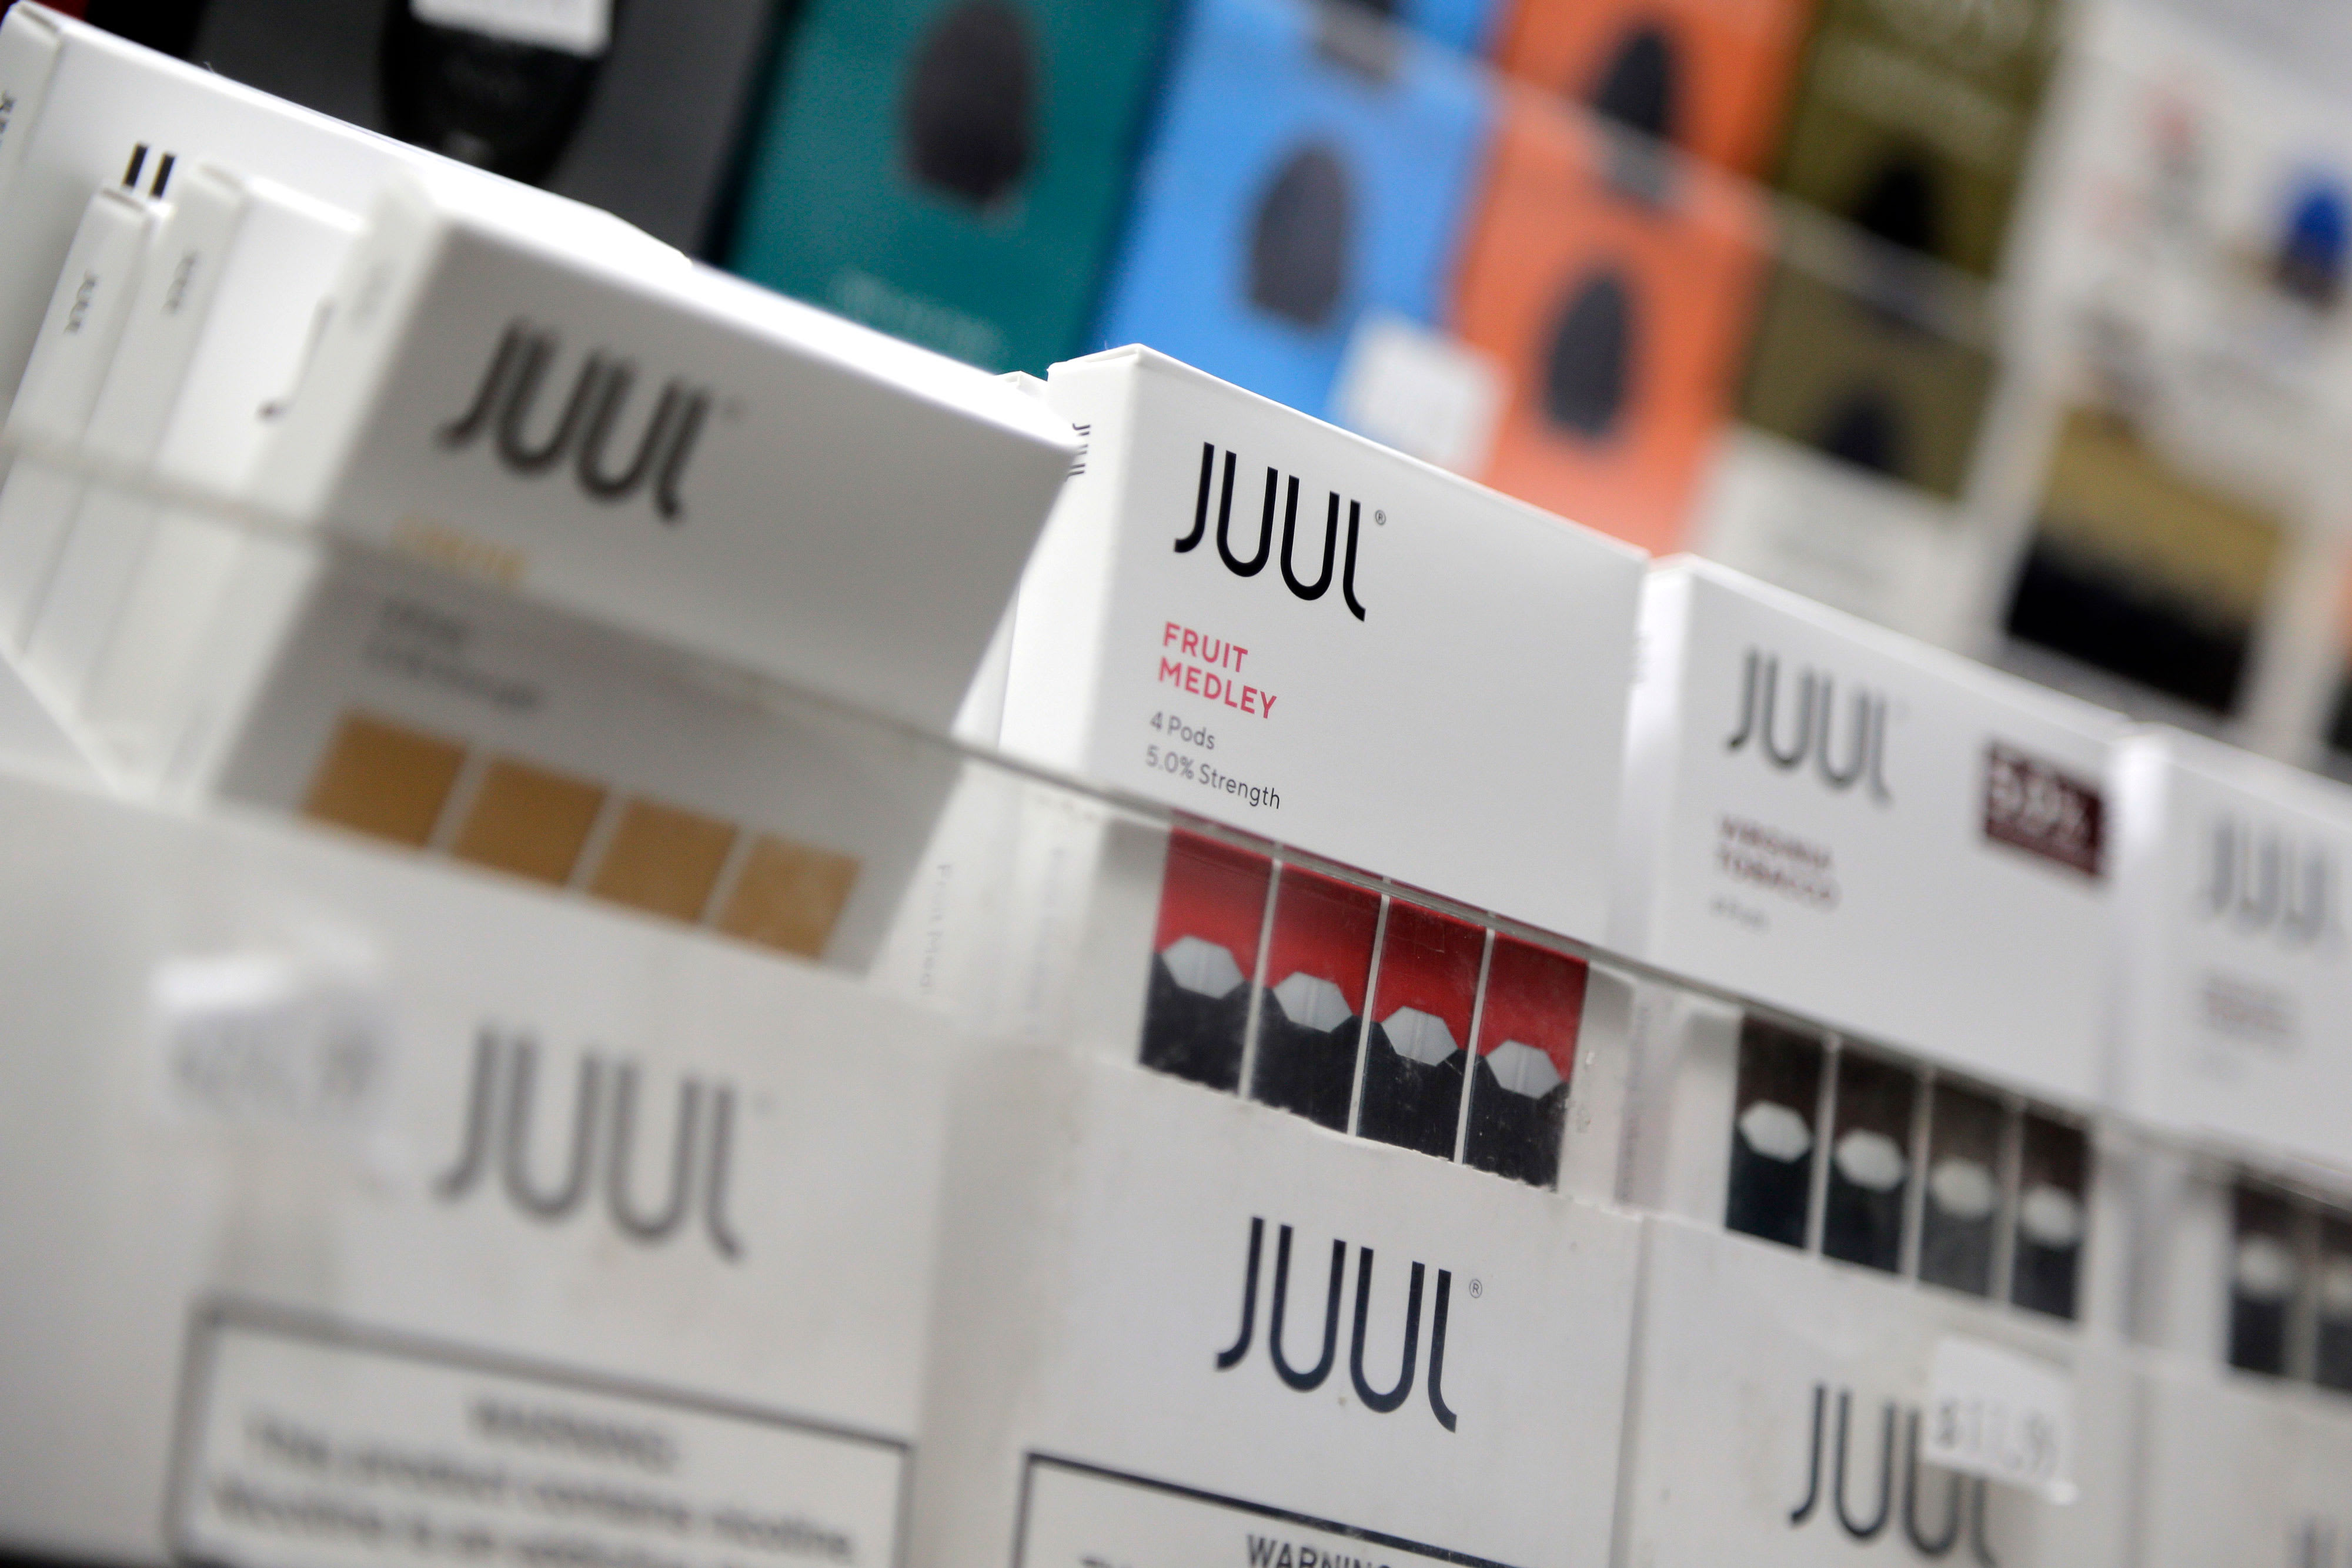 FTC is reportedly investigating Juul's marketing practices